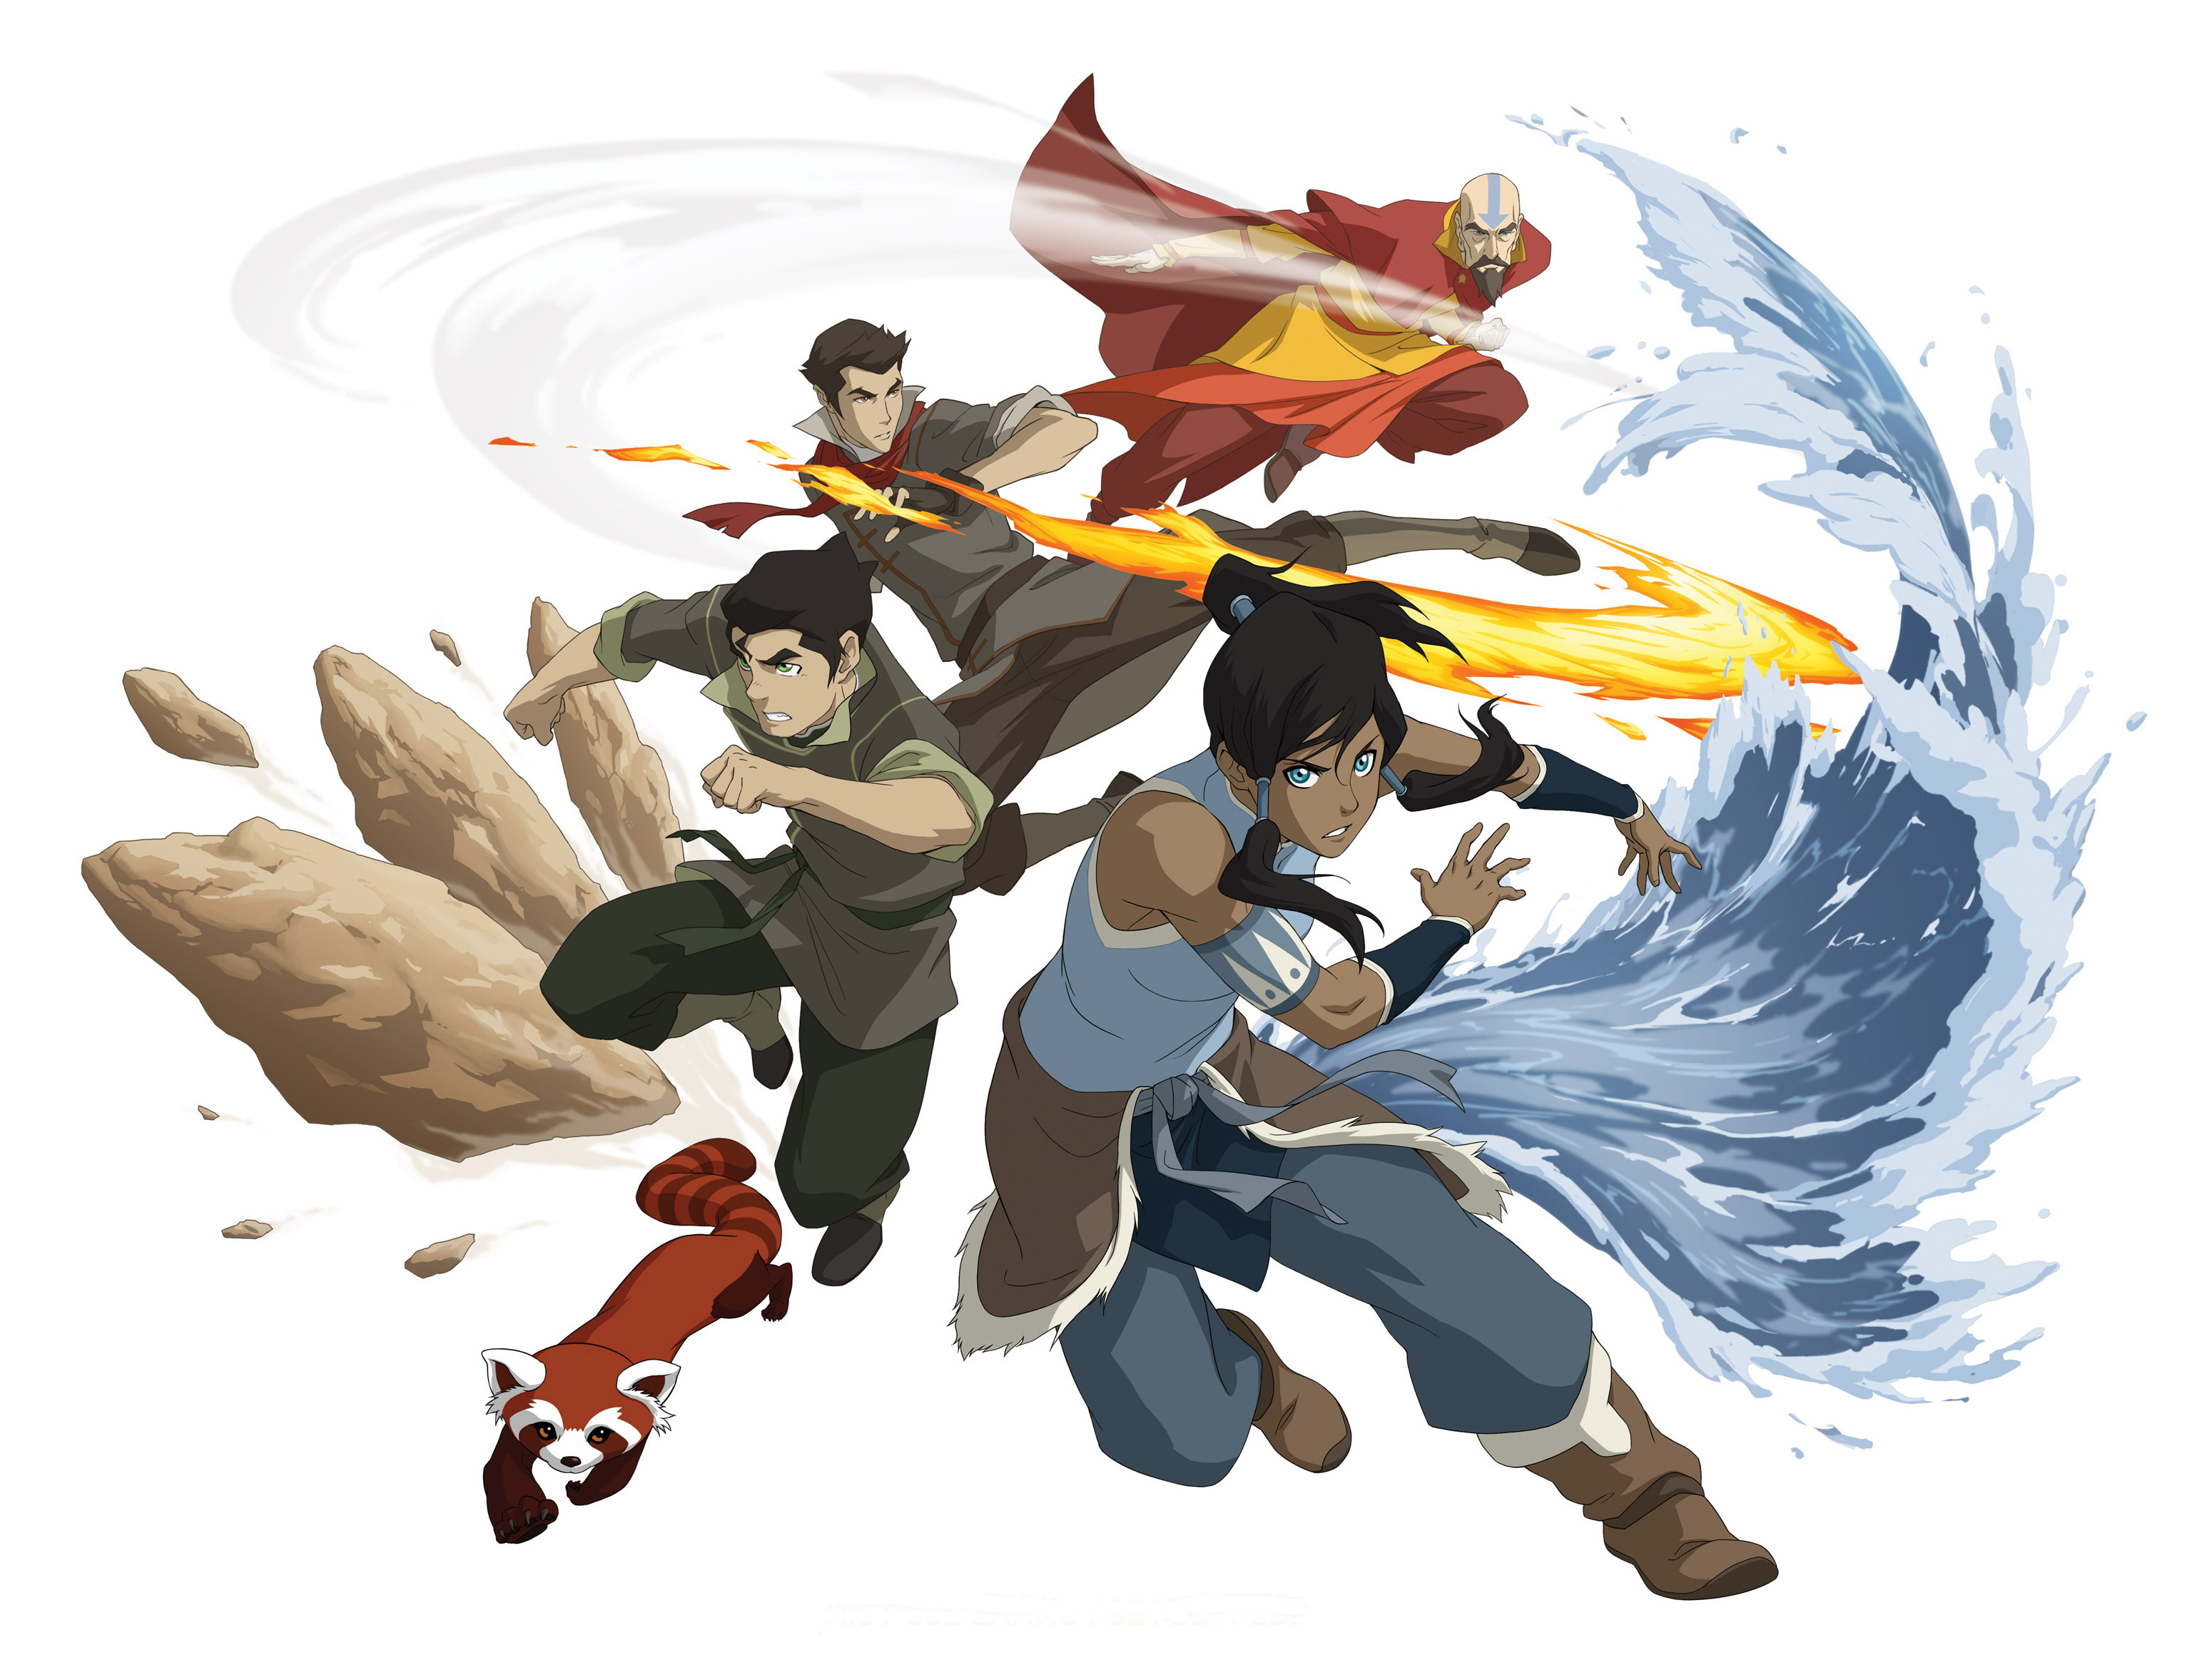 The Legend Of Korra Sequel To The Famous Animated Series Avatar The Last Airbender Has 